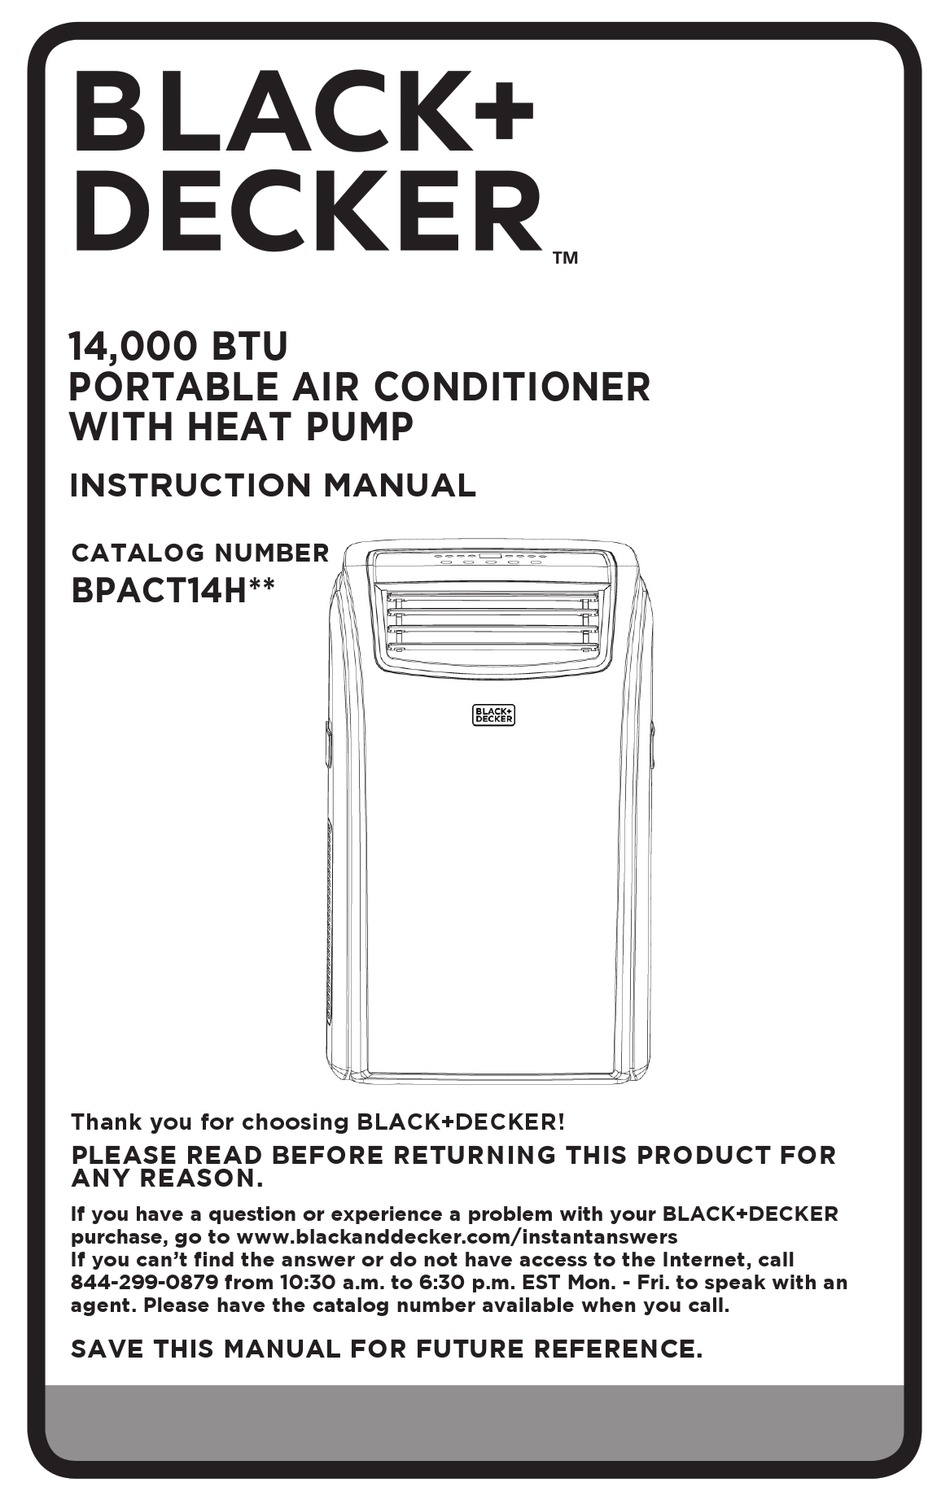 Dissassemble Black and Decker BPACT08 portable air conditioner